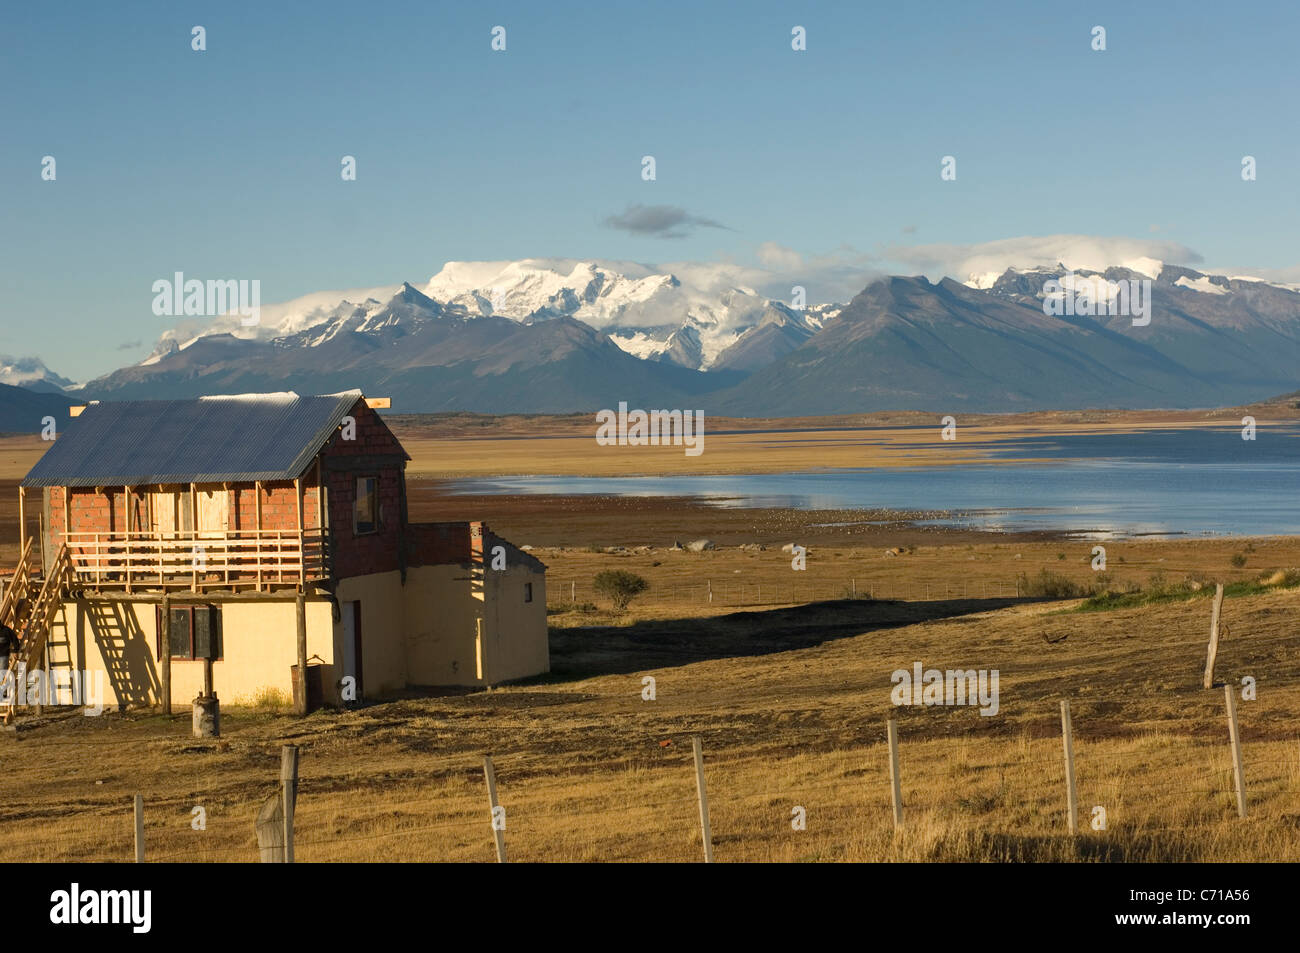 A typical gaucho dwelling looks over Lago Argentino towards the mountains surrounding the Perito Moreno glacier in Argentina. Stock Photo